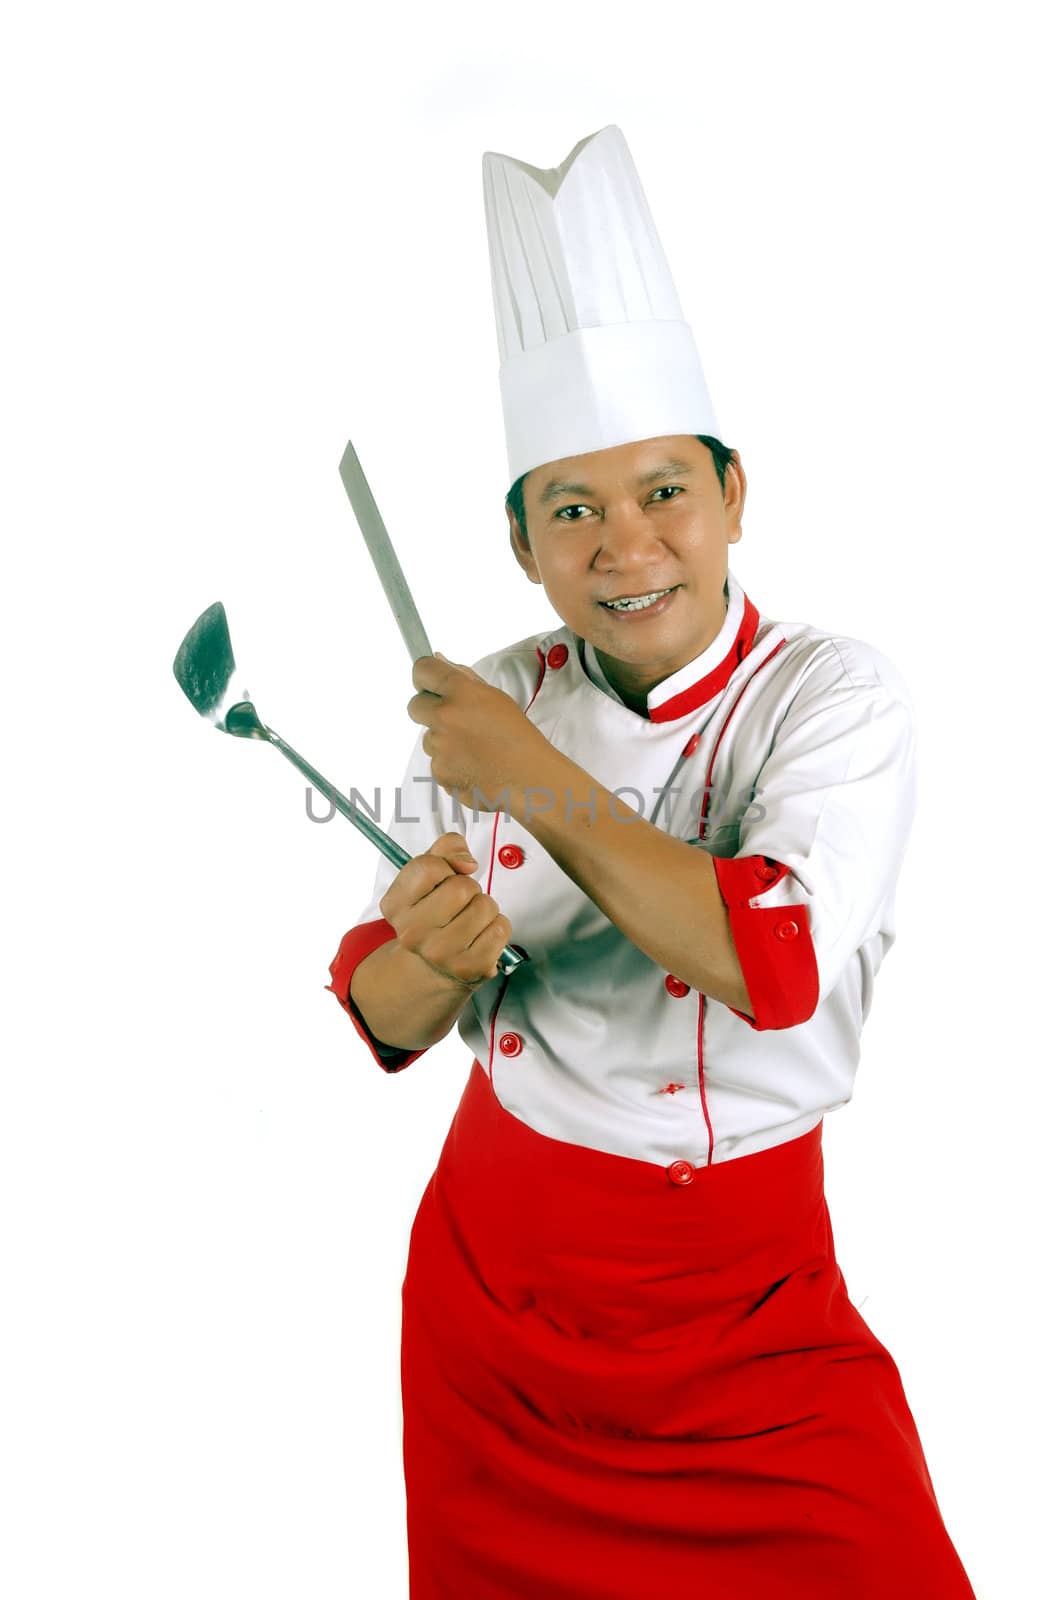 chef holding cooking utensils and kitchen knife  by antonihalim